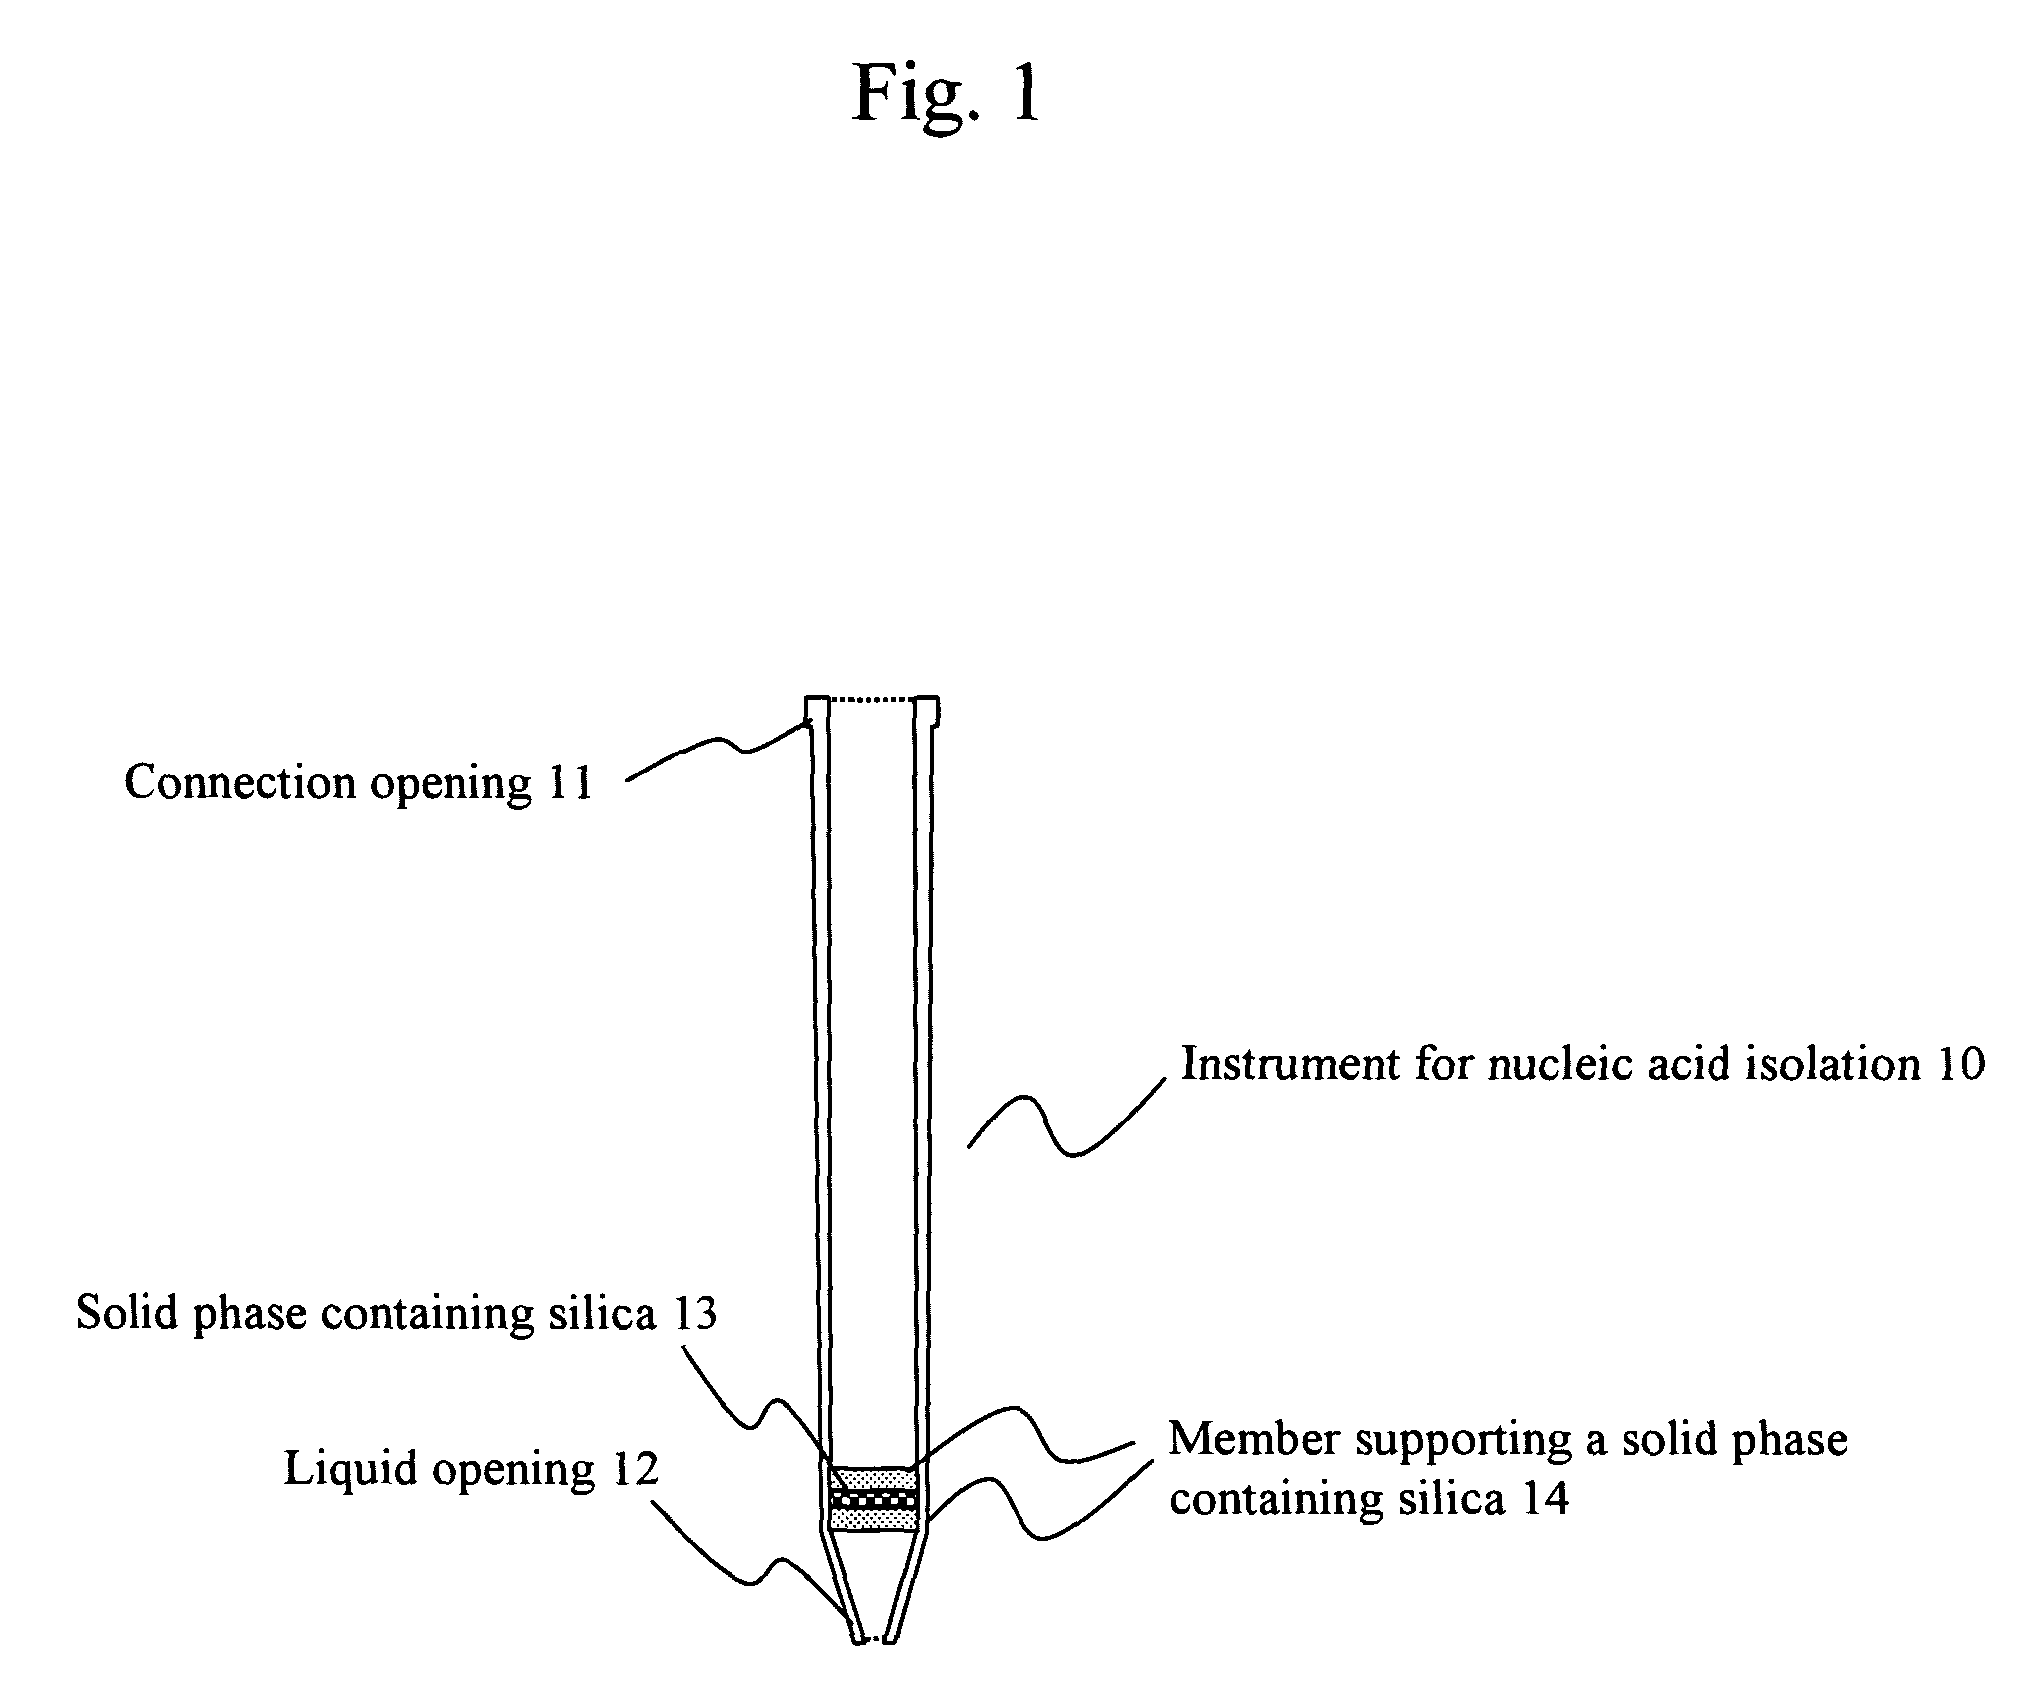 Methods for nucleic acid isolation and instruments for nucleic acid isolation